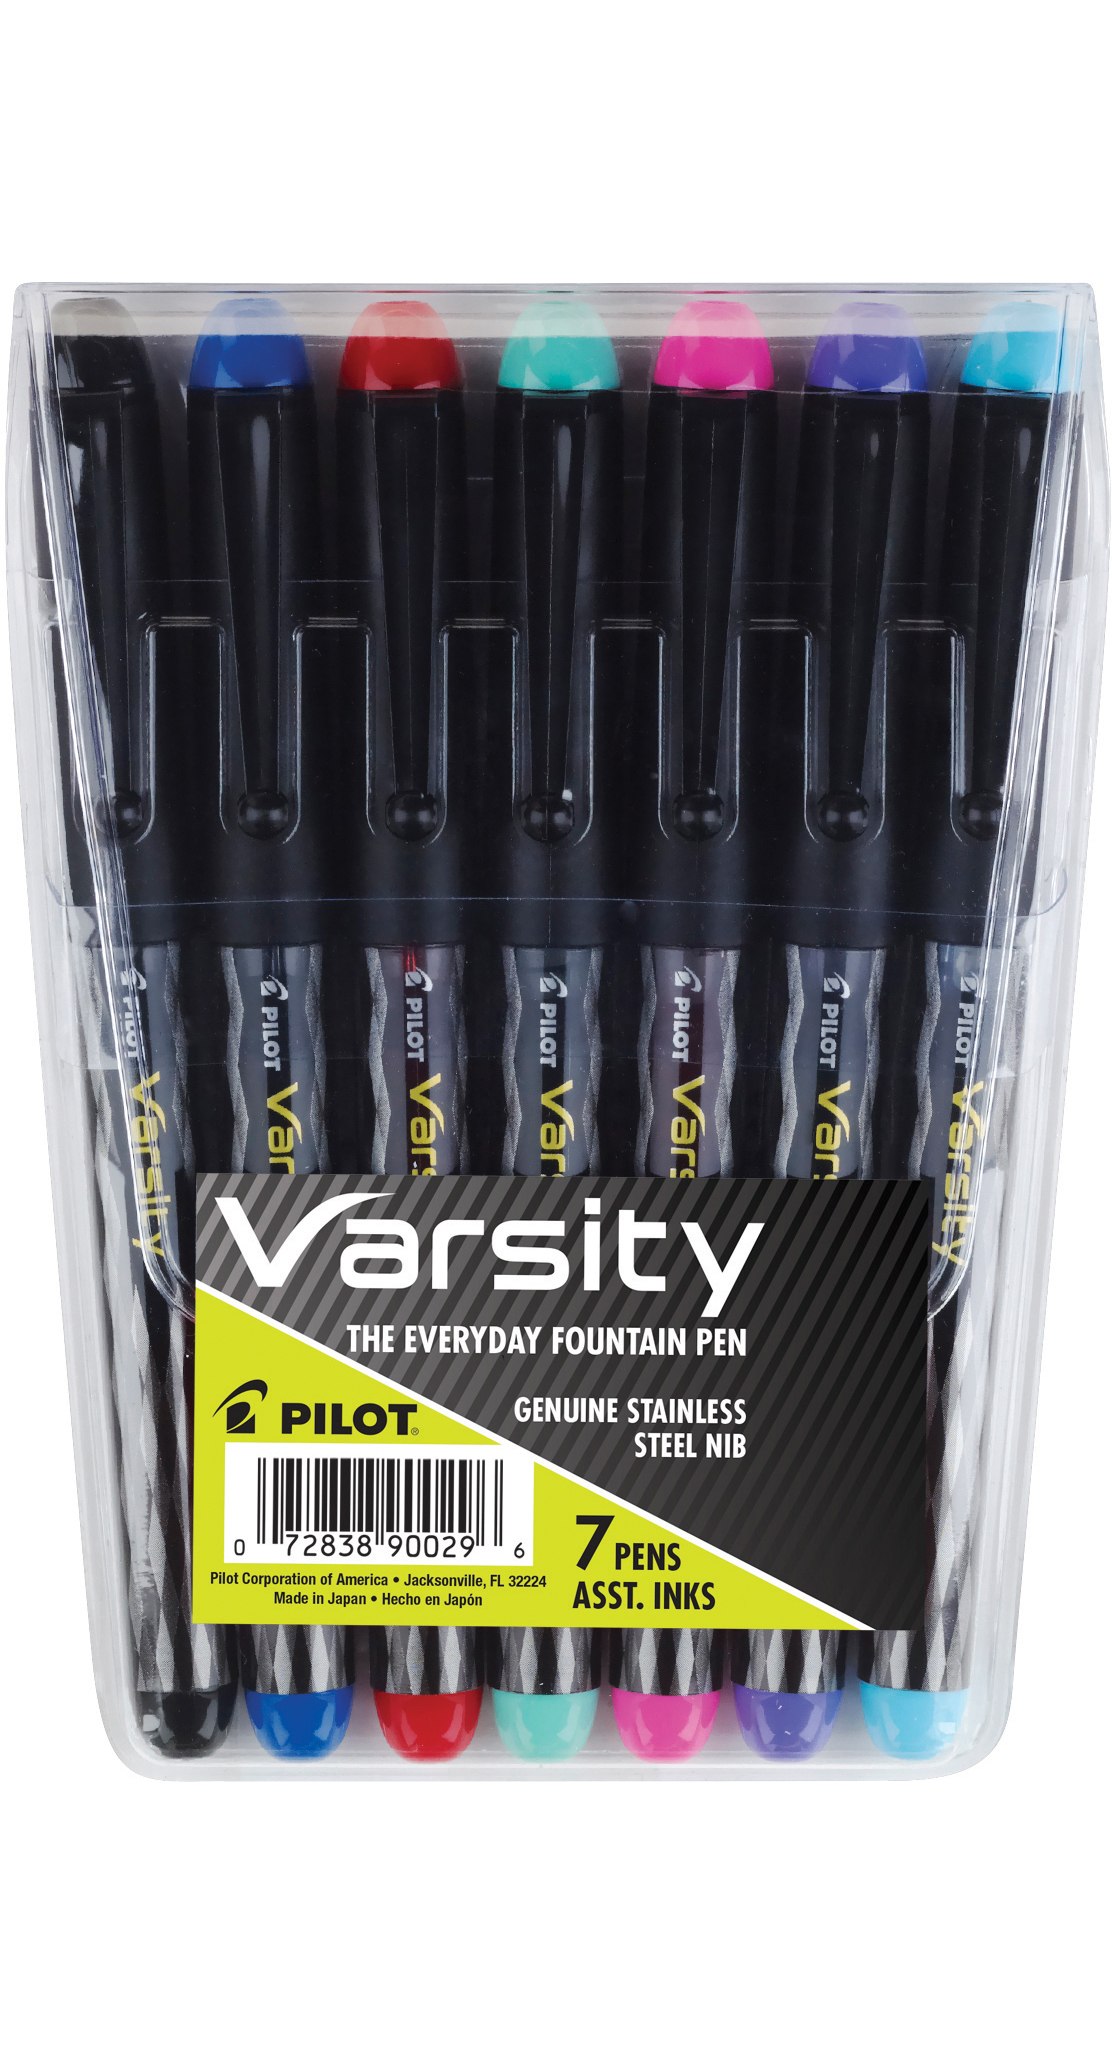 Pilot Varsity Pen Pouch of 7 Pens - 90029 - Pens, Fountain Pens, Writing  Instruments, Ink, Stationery, Office Supplies